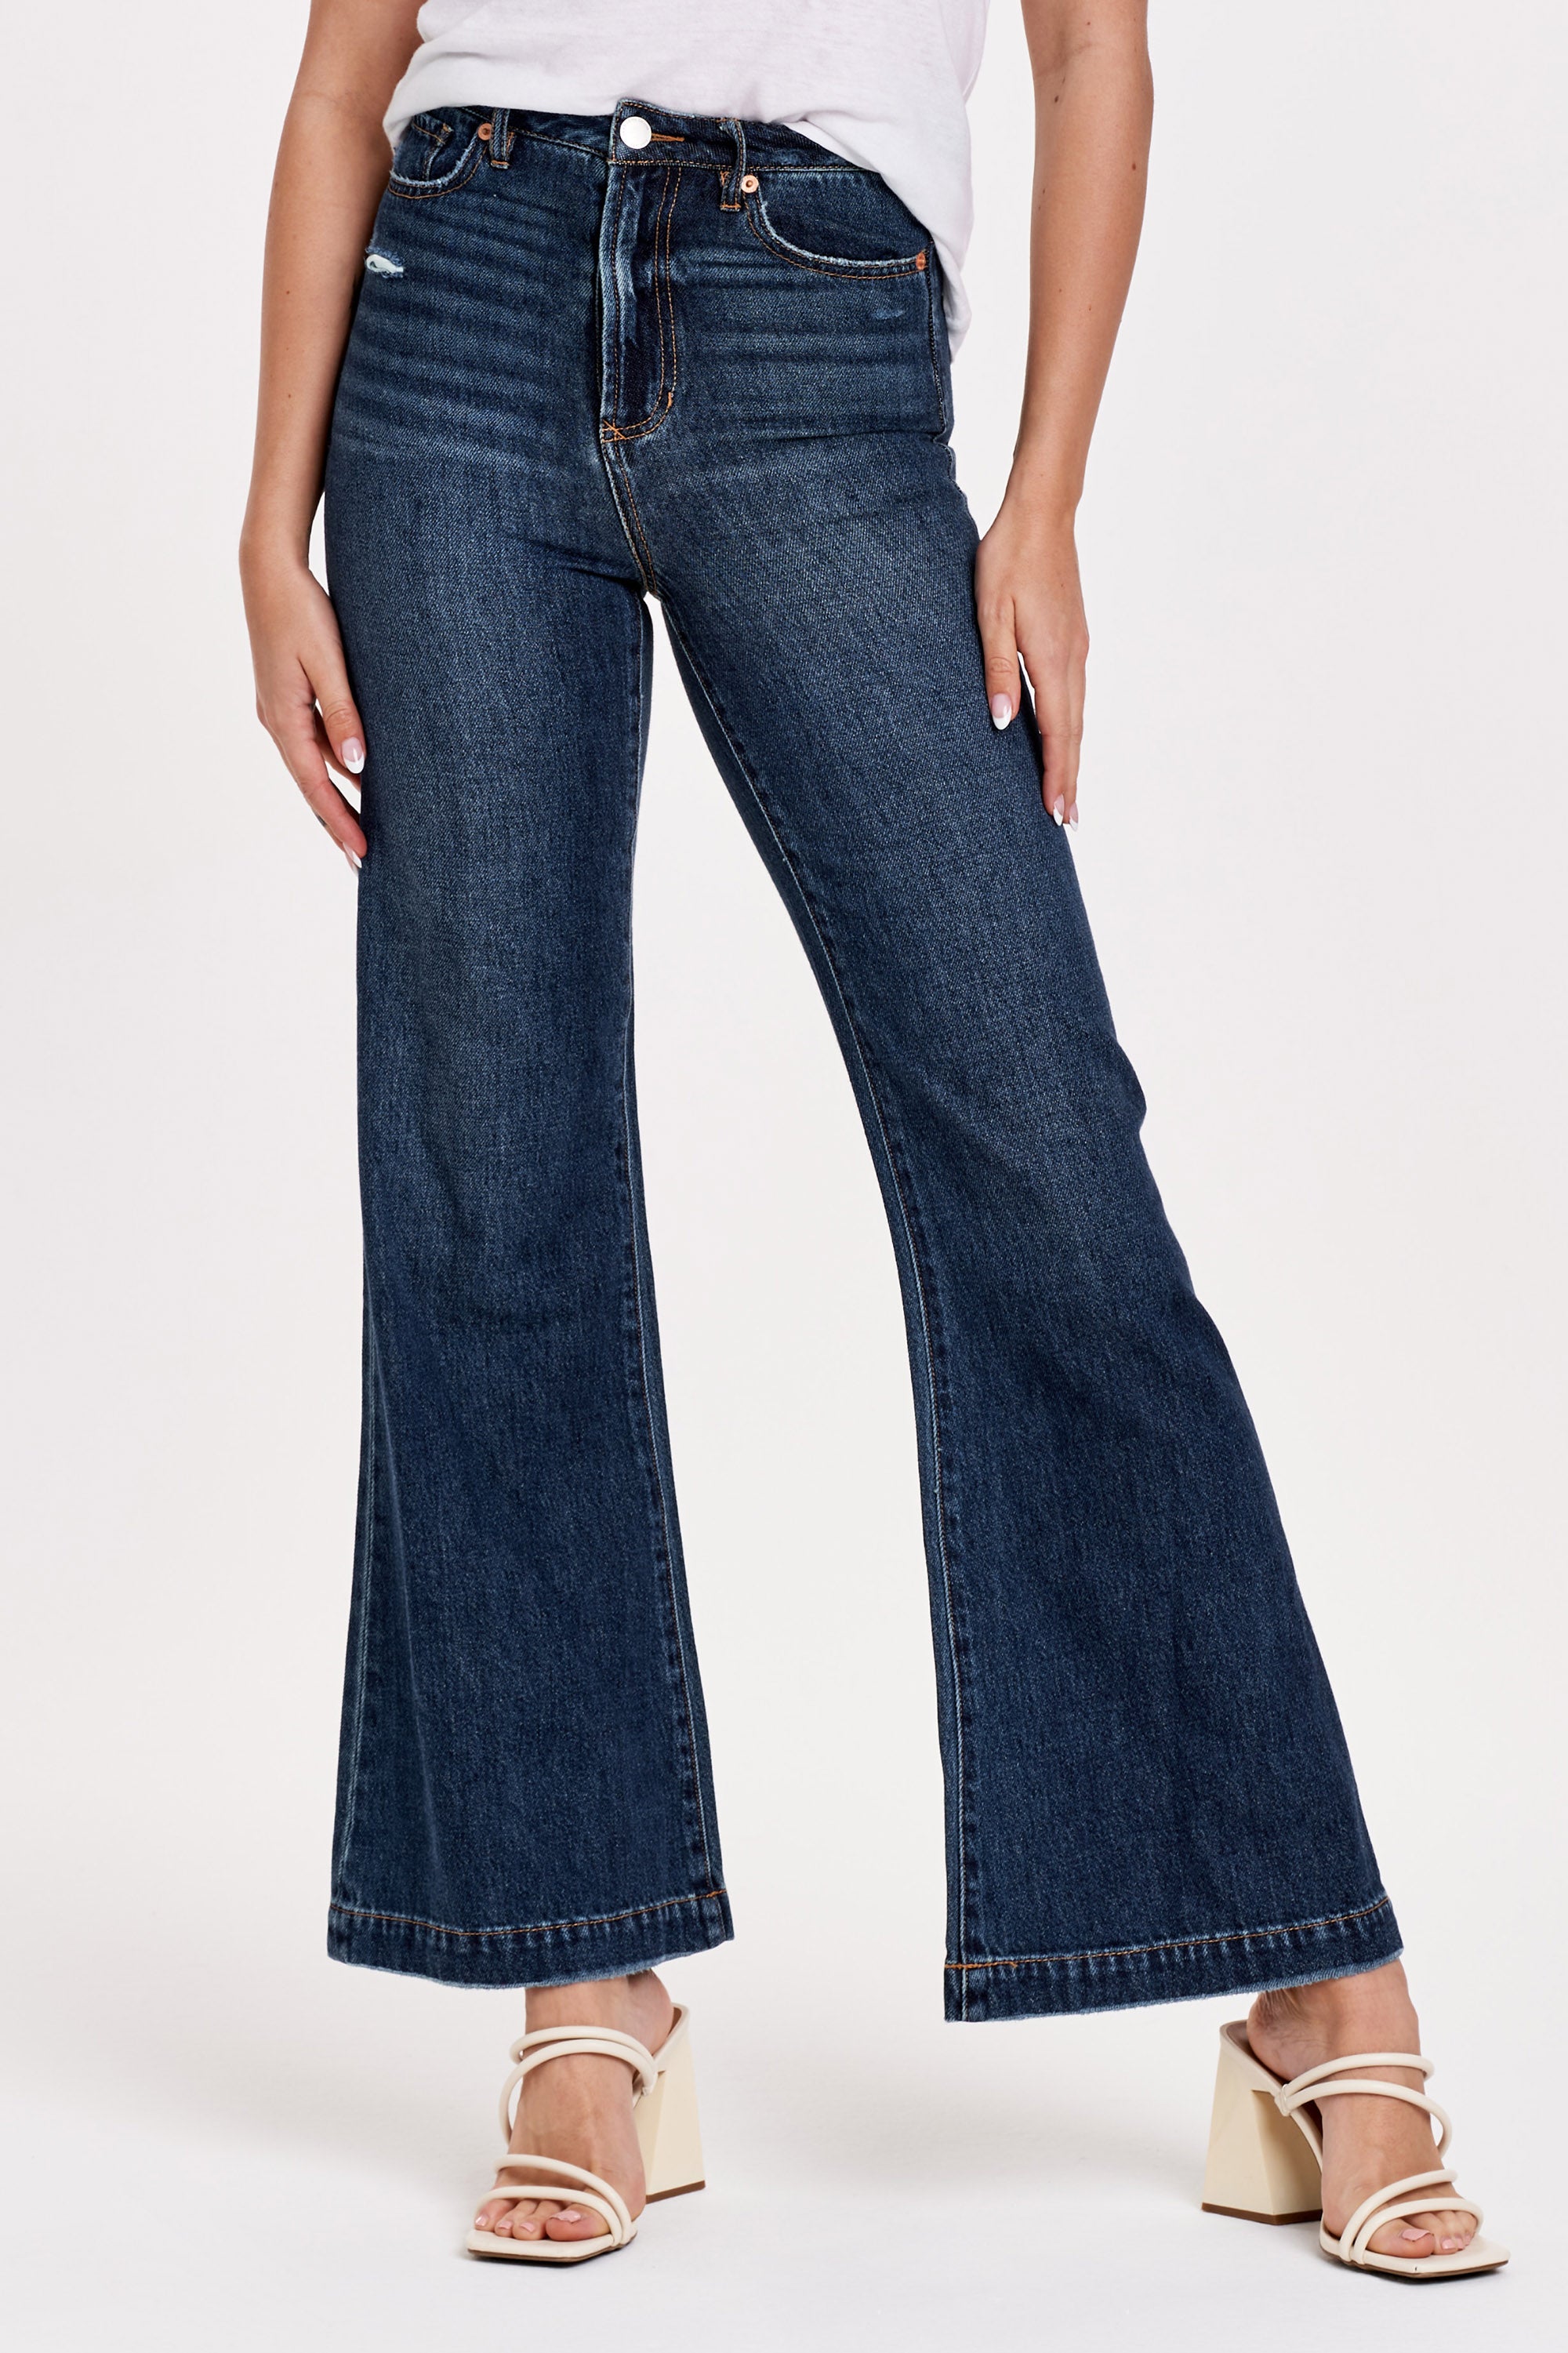 Jeans and Pants – Brazos Avenue Market